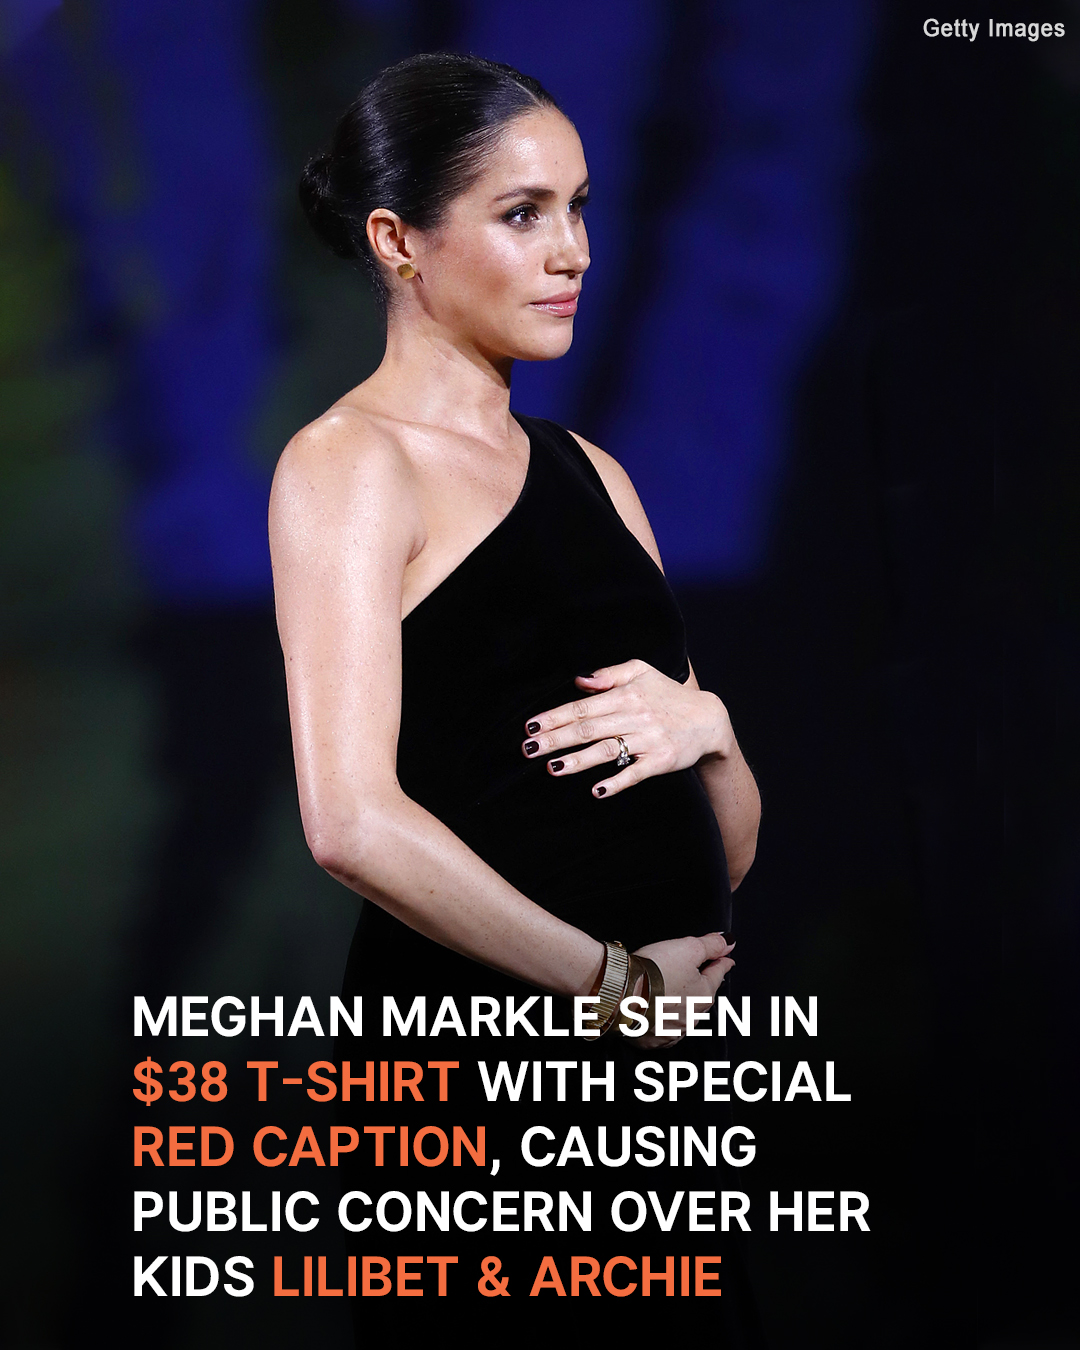 MEGHAN MARKLE POSES IN T-SHIRT WITH SPECIAL CAPTION, CAUSING DISCUSSION ...